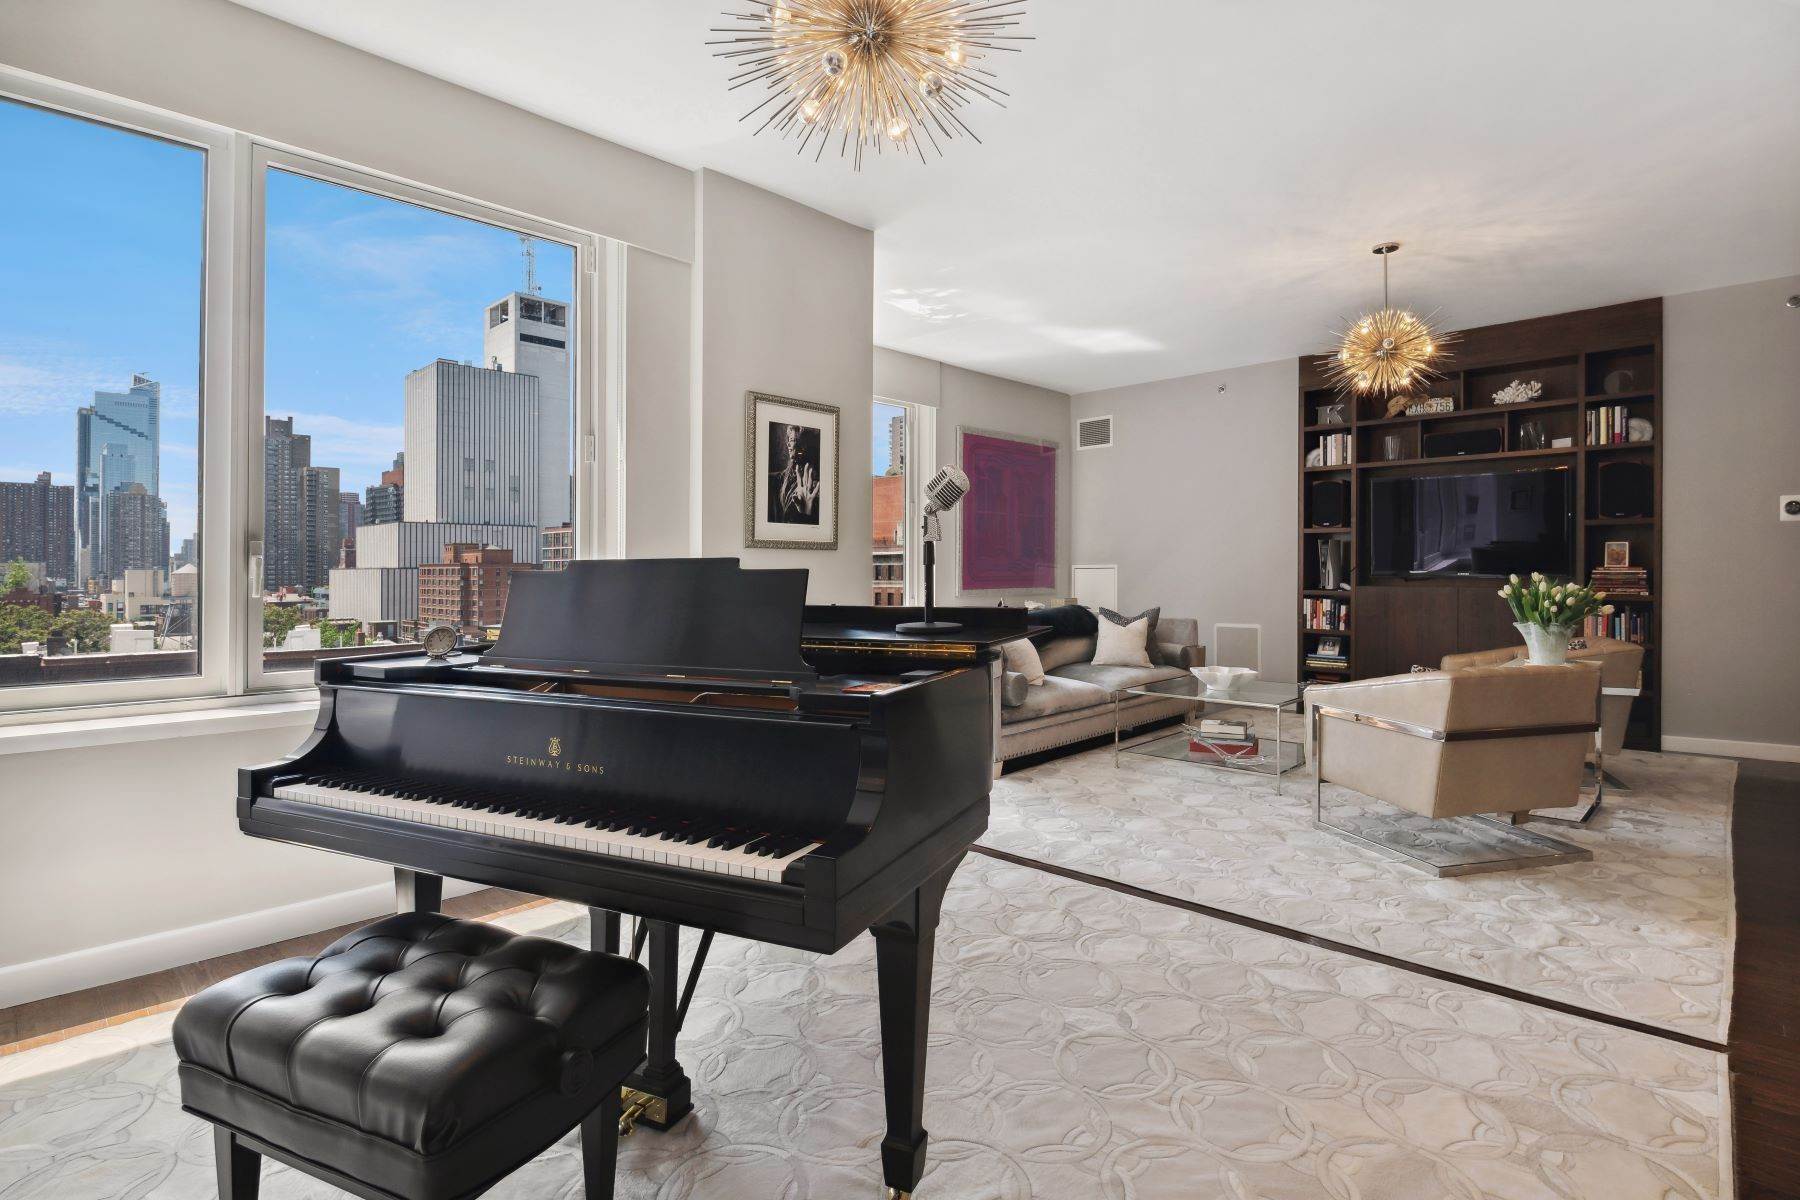 Condominiums for Sale at 462 West 58th Street, 8A New York, New York 10019 United States